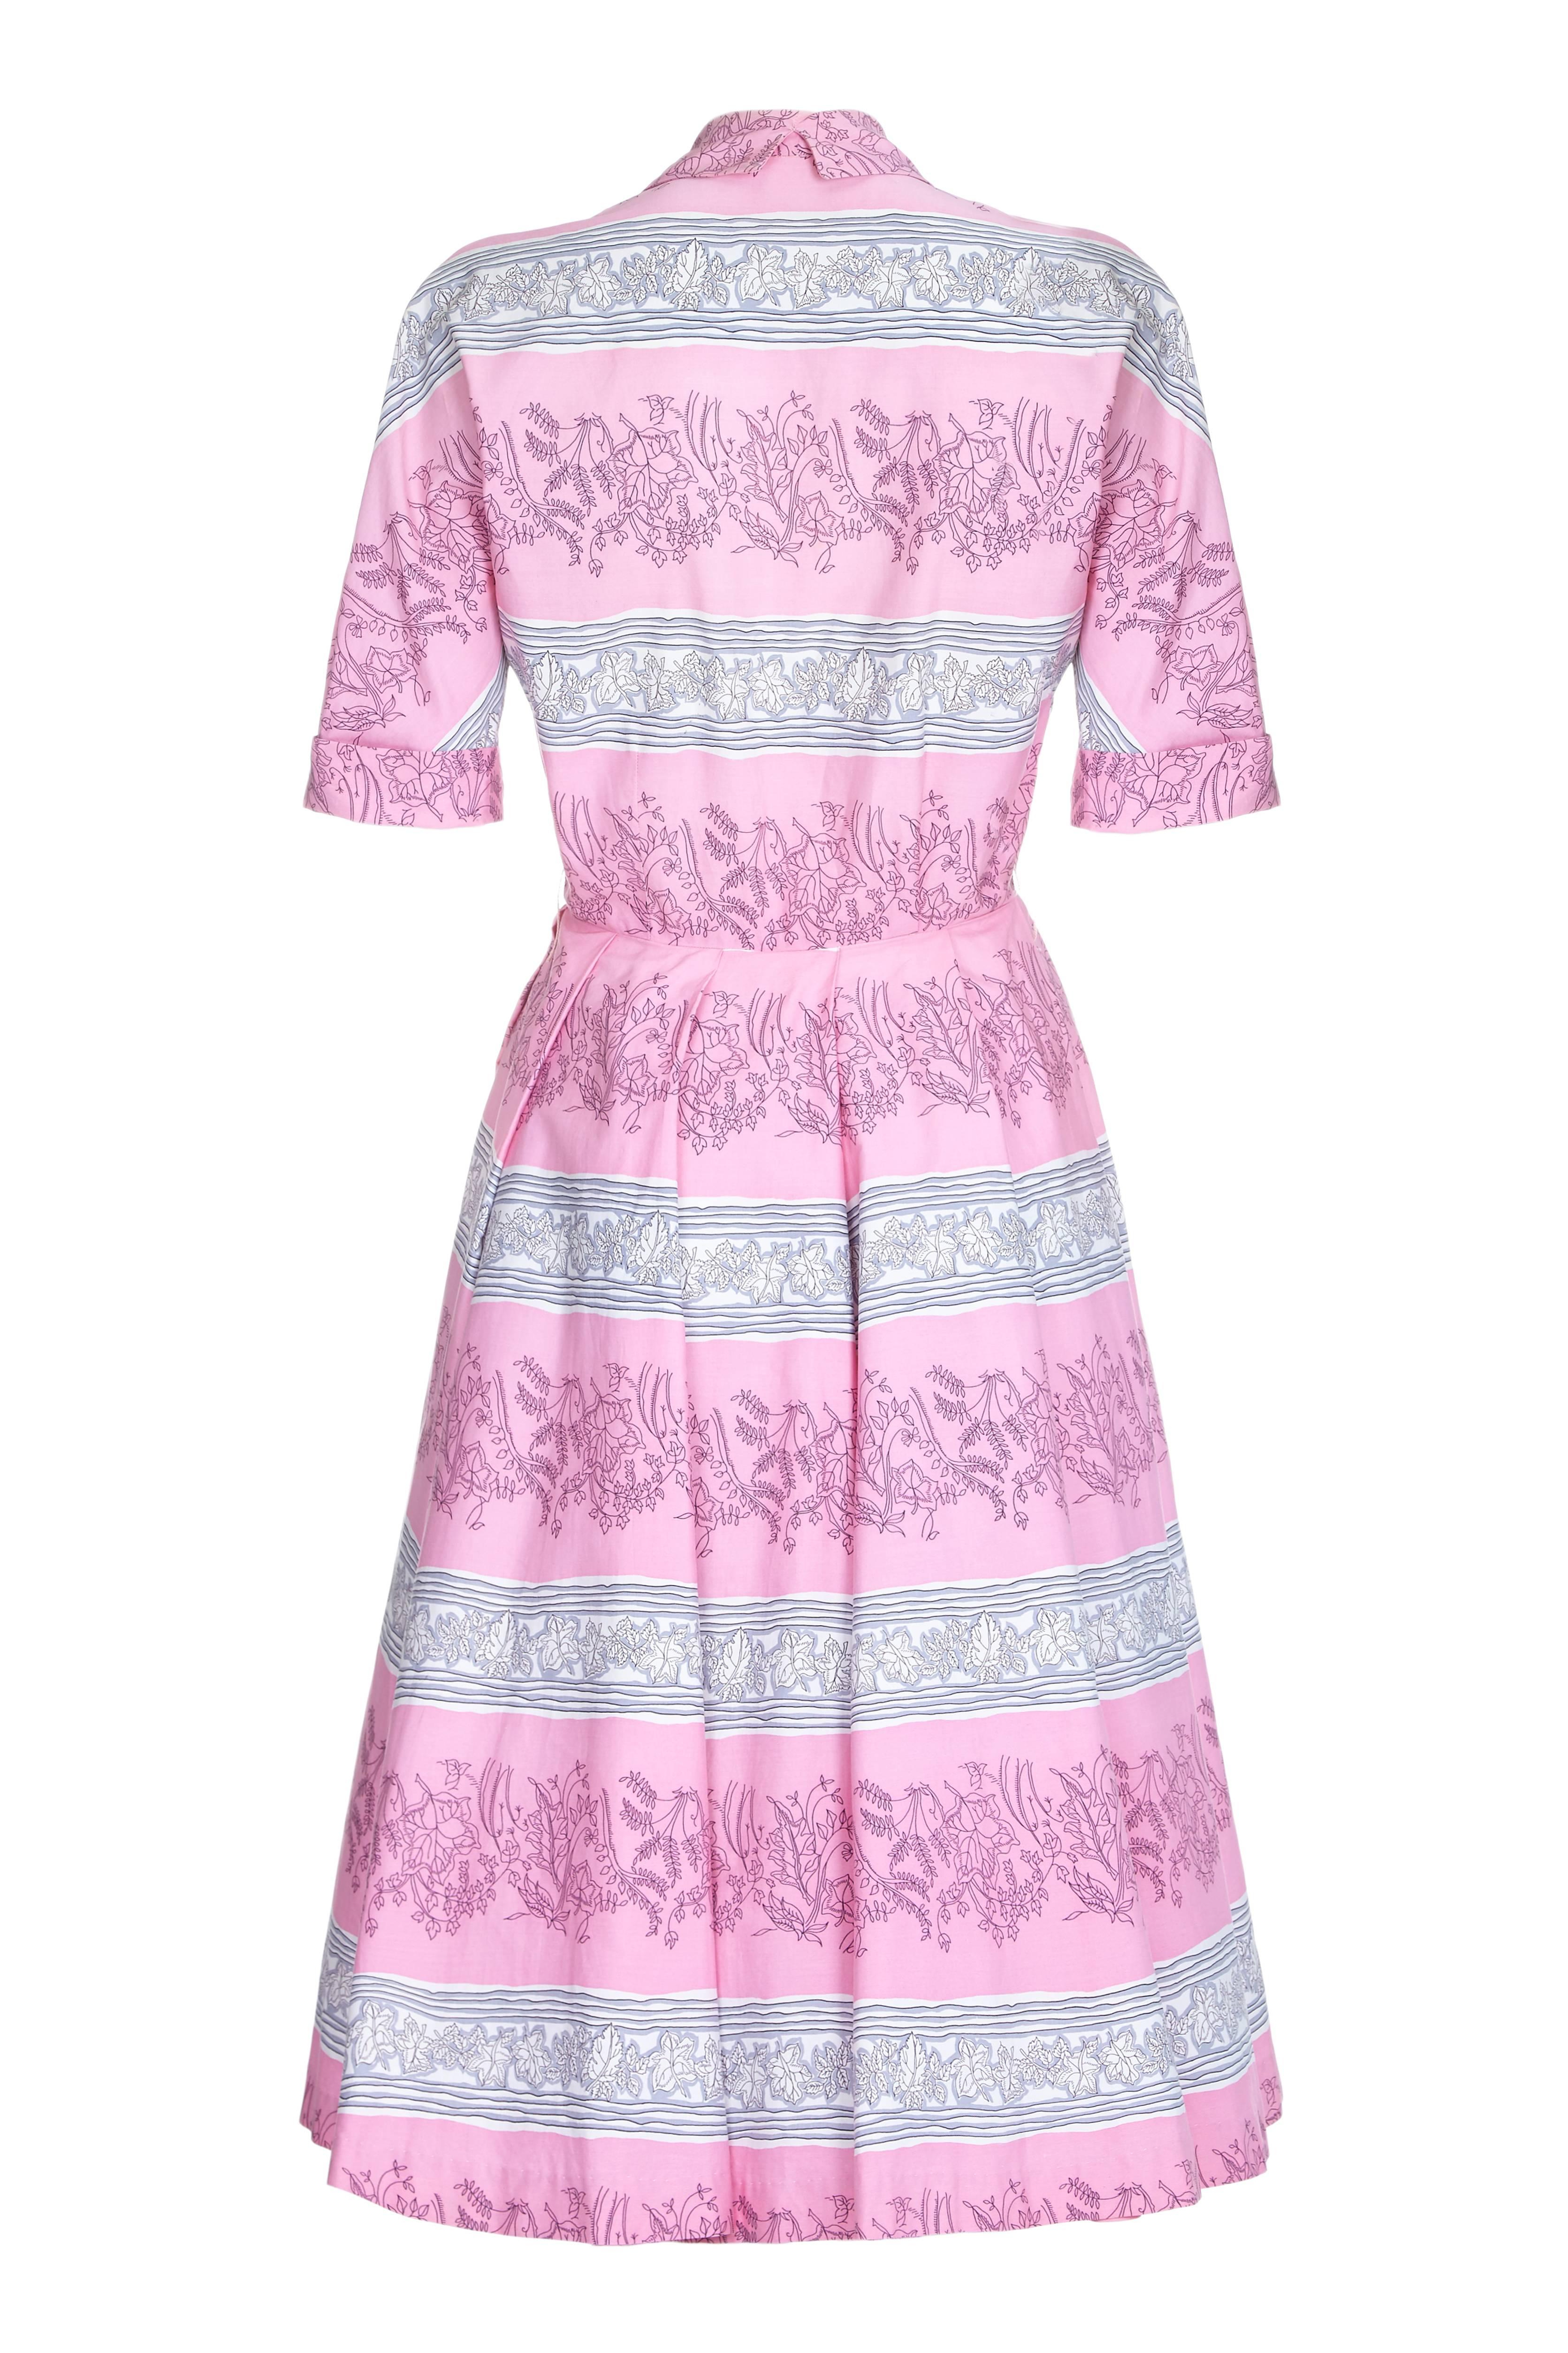 1950s crisp cotton Horrockses dress with various leaves featured in the print including several types of ivy.  This style features a cross over bodice with wide collar and is fastens with hook and eyes on the waist. With elbow length sleeves and a